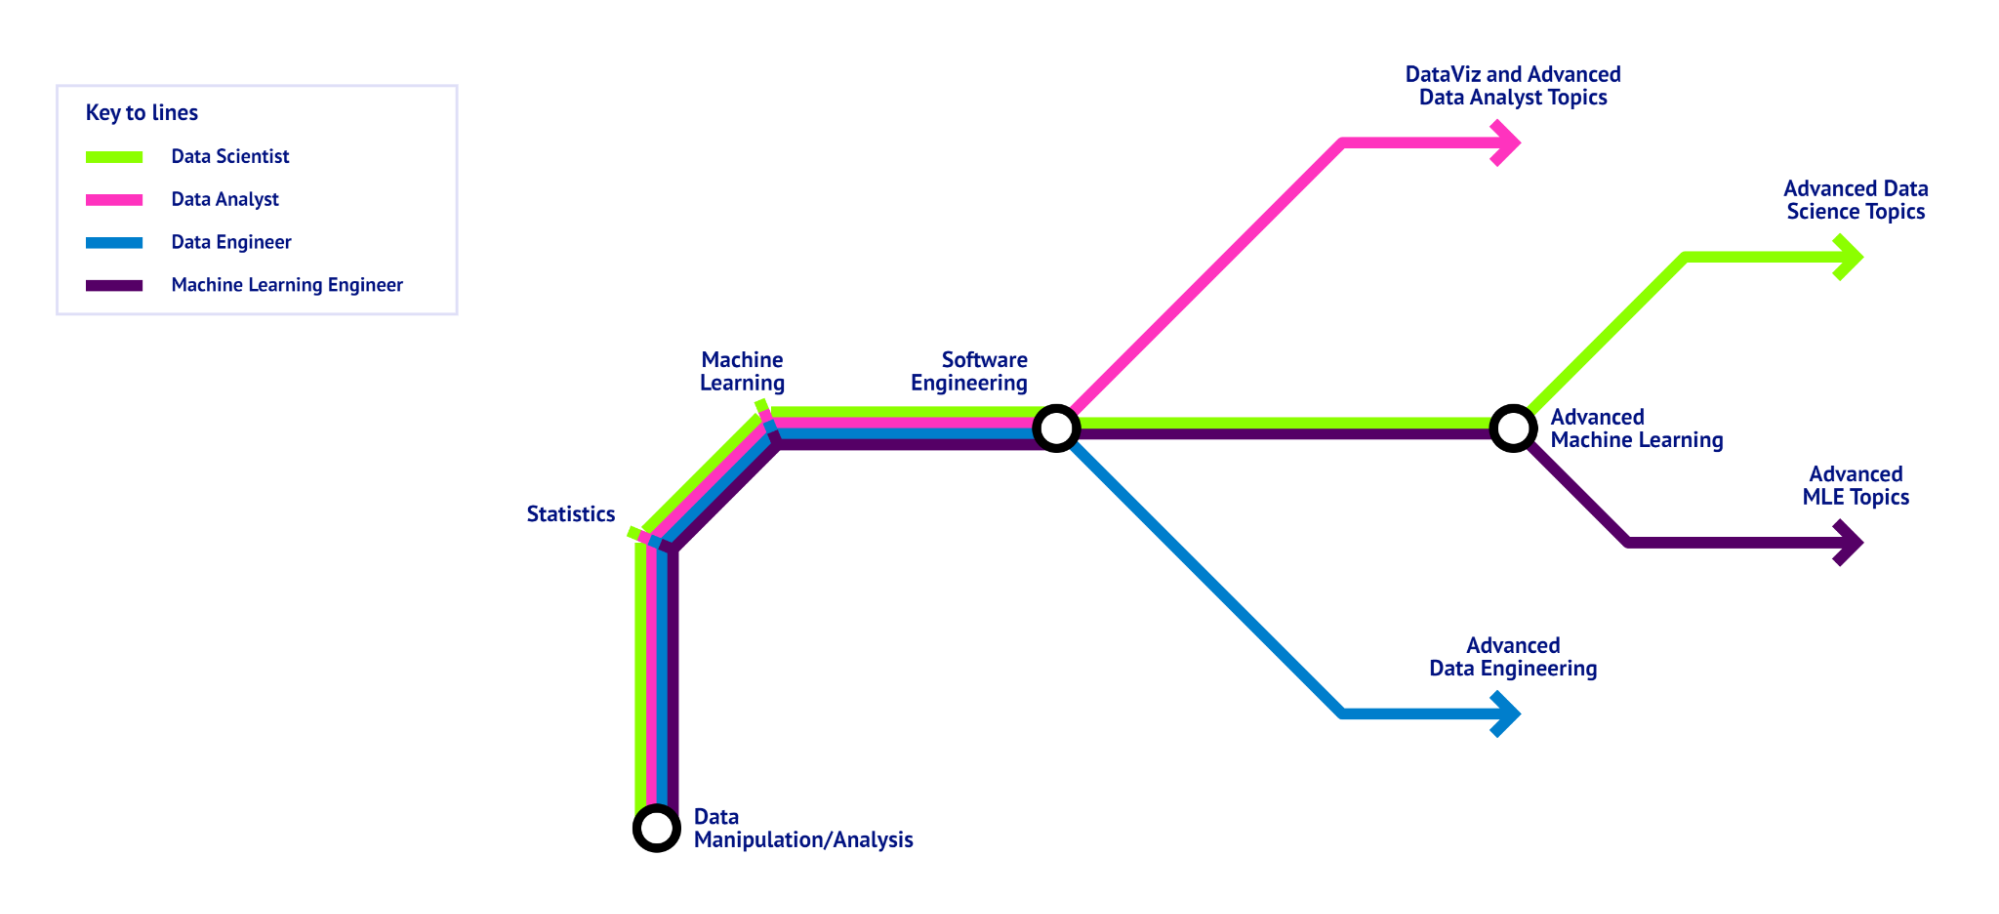 A Data Science Roadmap visualized as metro map, showing the foundation all data science Roles have in common and the skills specific to the different roles. - Image by Author